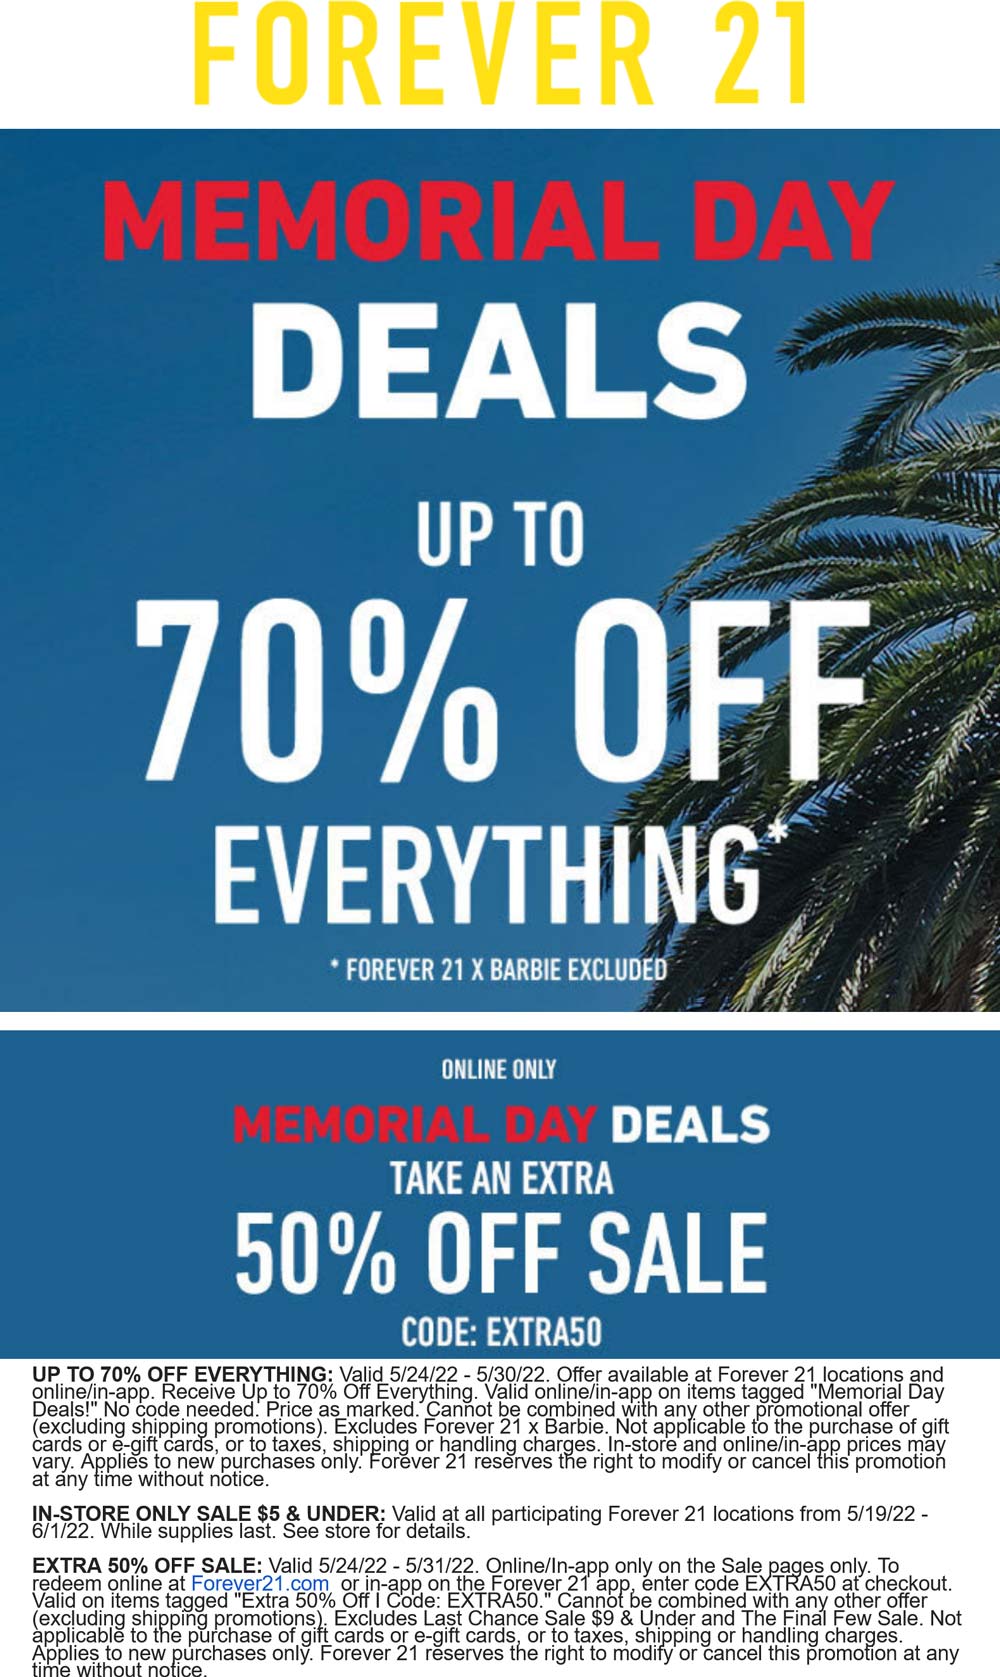 Forever 21 stores Coupon  Extra 50% off sale items at Forever 21 via promo code EXTRA50 #forever21 